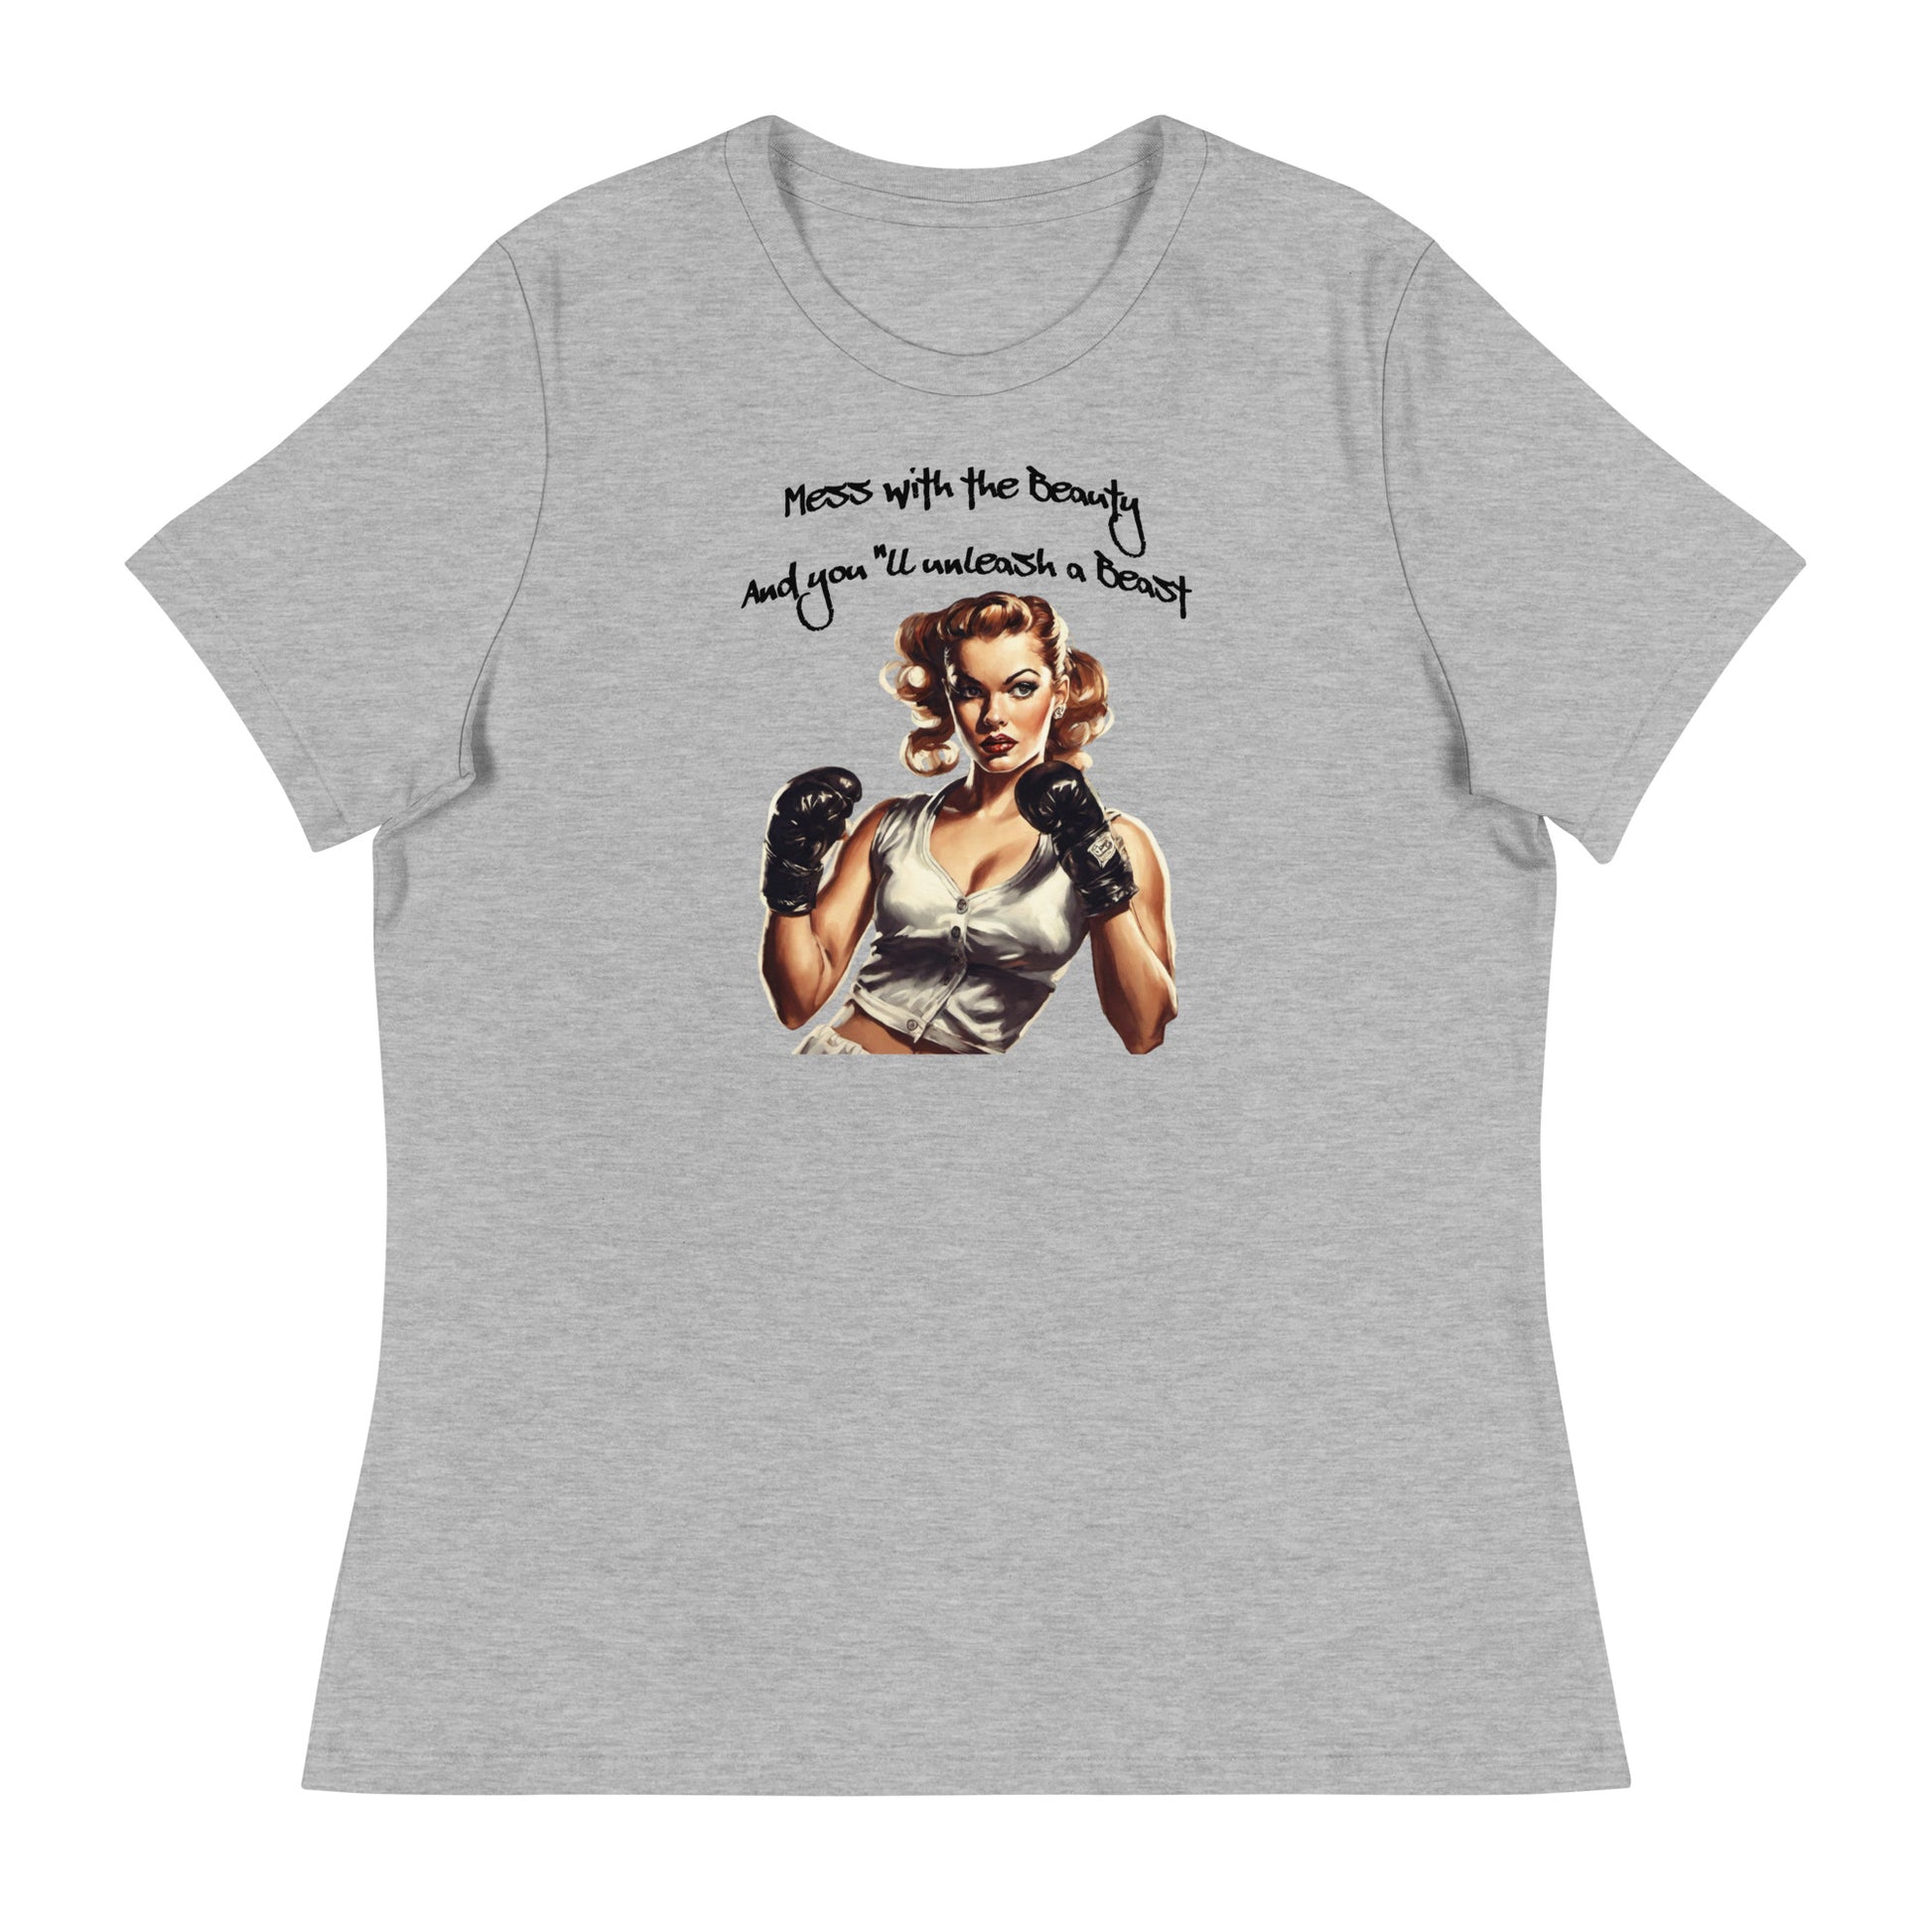 Mess with the Beauty, Unleash the Beast Women's Strength T-Shirt Athletic Heather